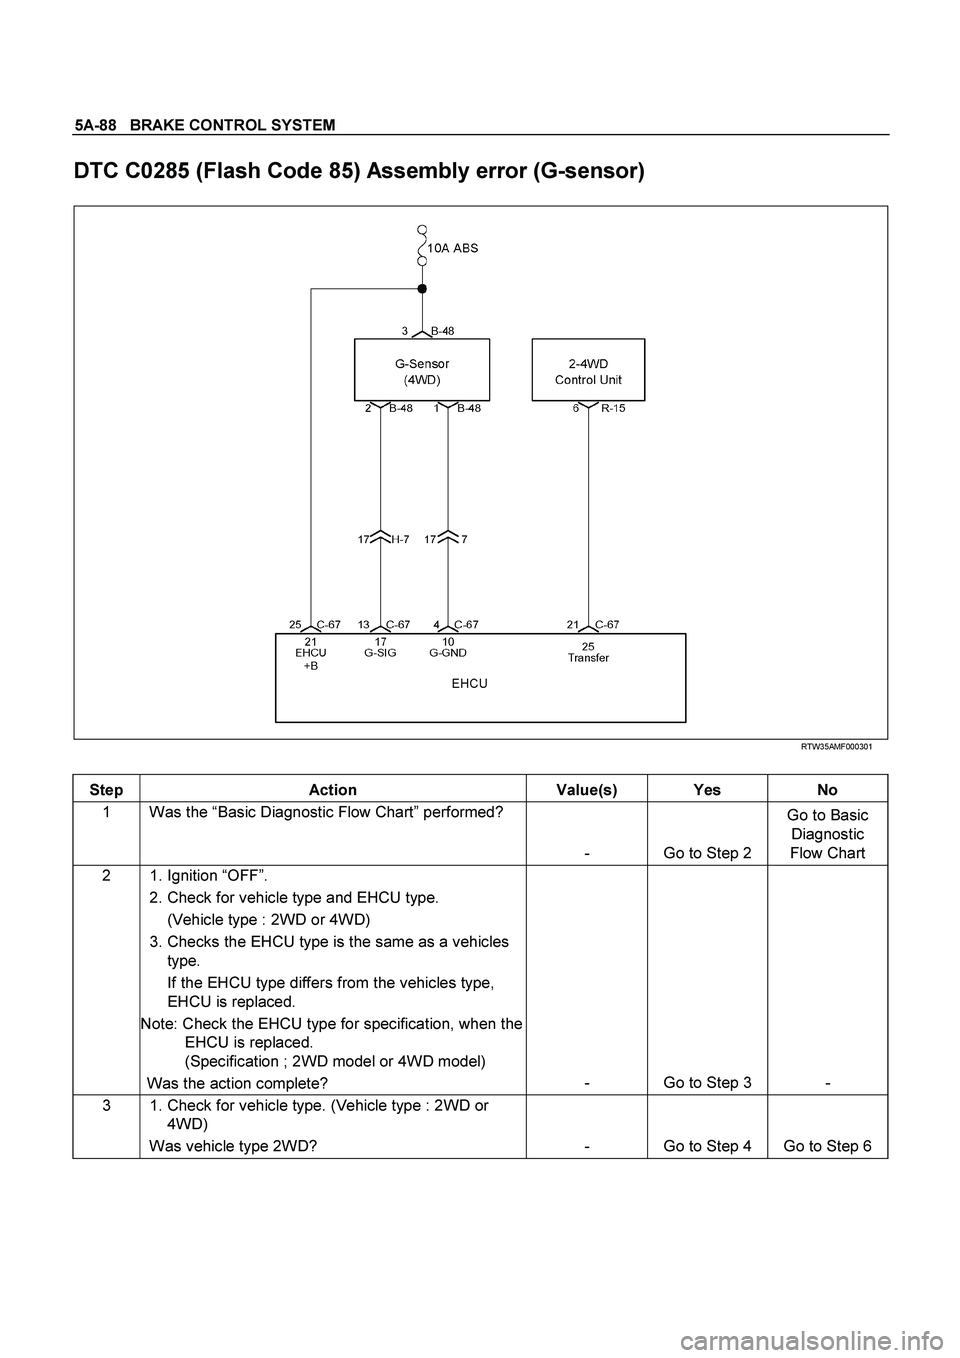 ISUZU TF SERIES 2004  Workshop Manual 5A-88   BRAKE CONTROL SYSTEM
 
DTC C0285 (Flash Code 85) Assembly error (G-sensor) 
 
  
  RTW35AMF000301 
 
Step Action  Value(s) Yes No 
1 Was the “Basic Diagnostic Flow Chart” performed? 
-  Go